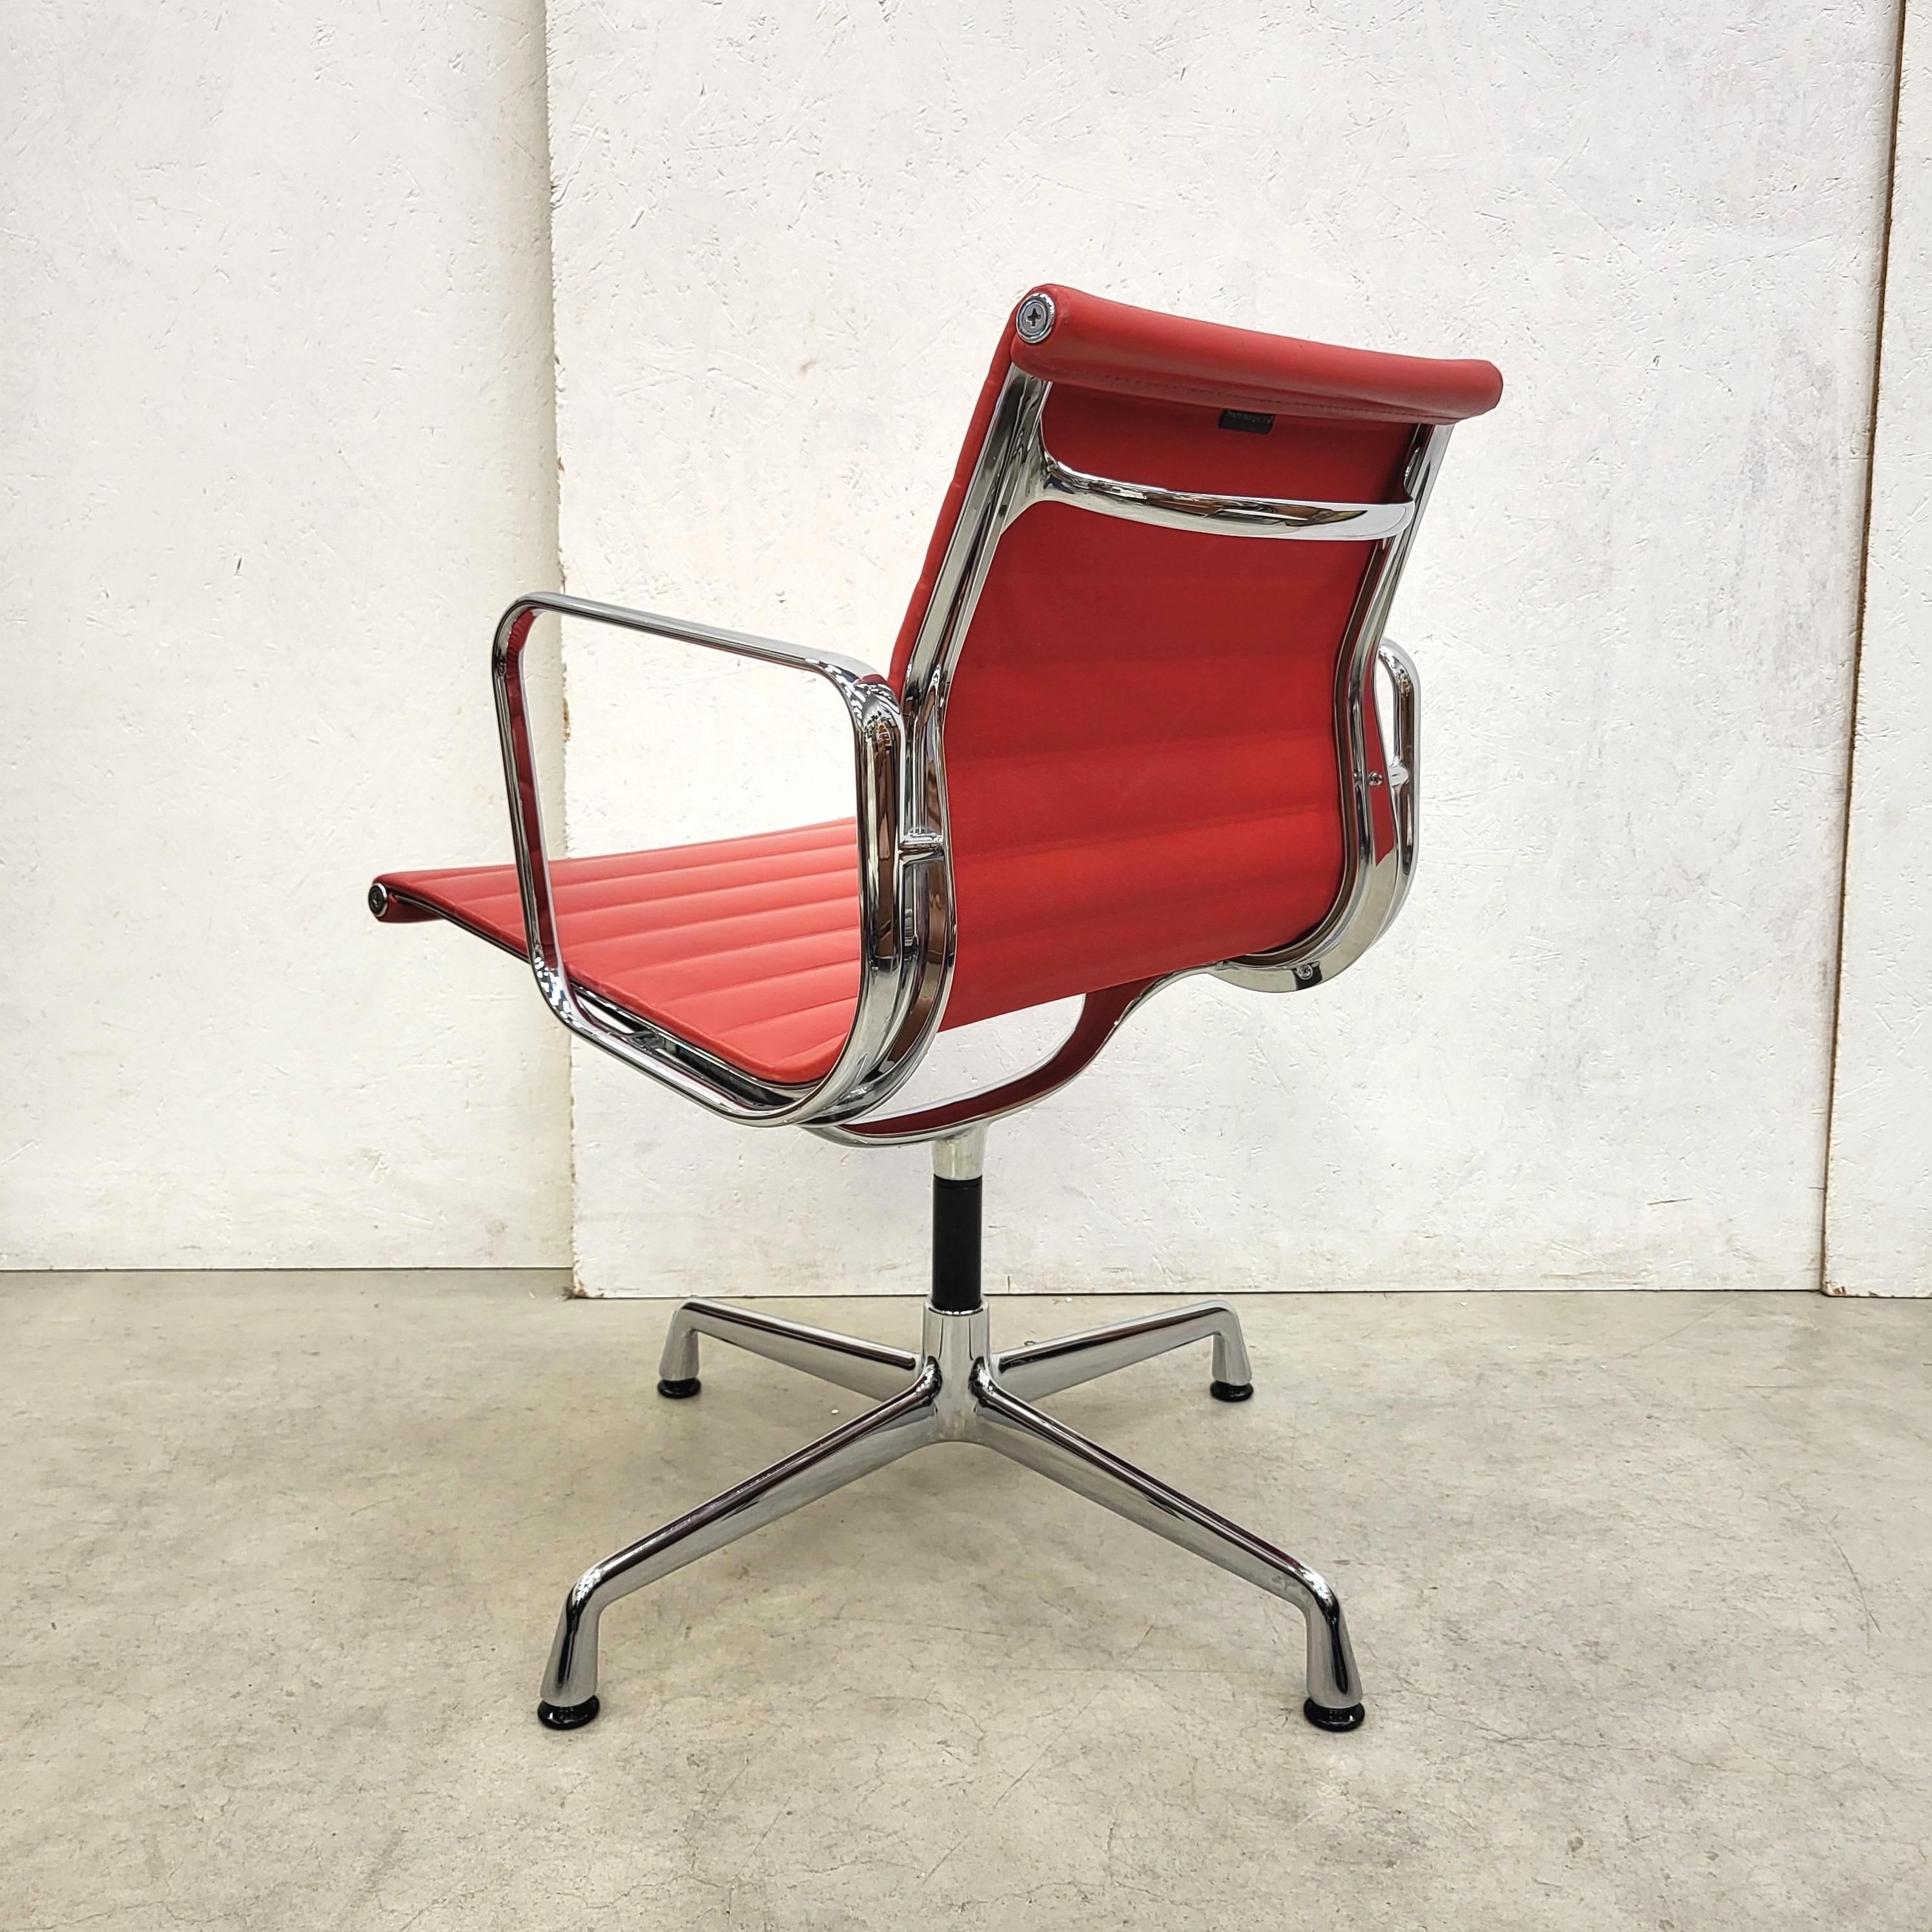 Contemporary Vitra Ea108 Aluminium Chair by Charles Eames Red Leather, Set of 4